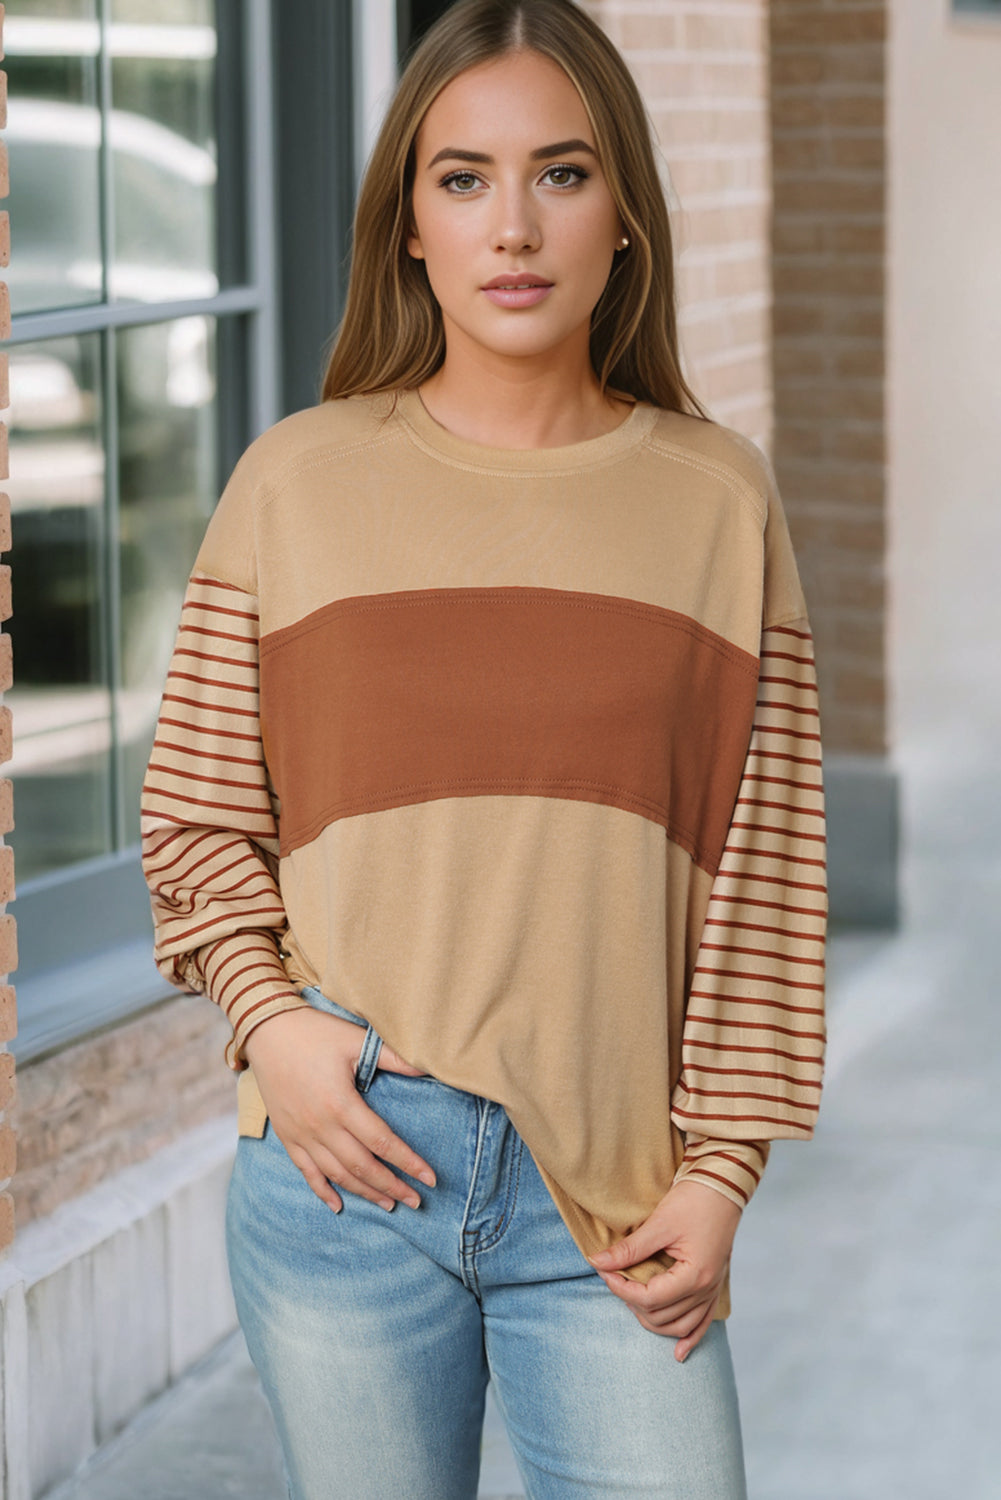 Peach Blossom Colorblock Striped Bishop Sleeve Top